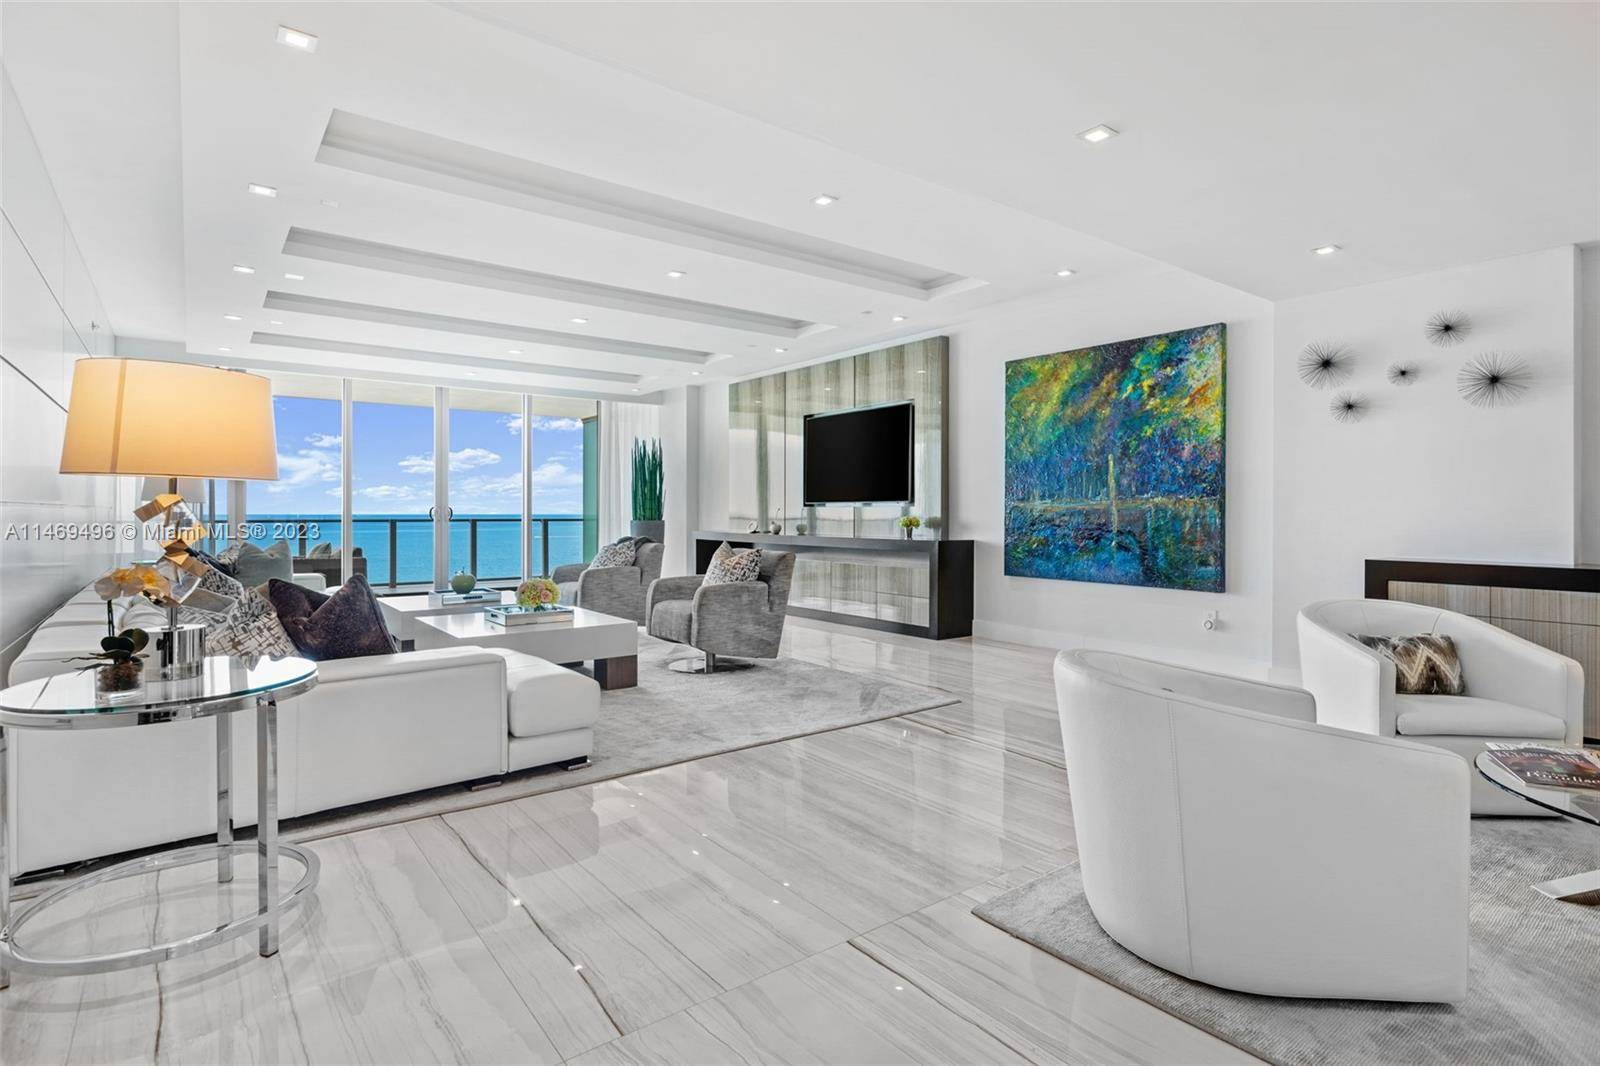 Discover Oceana Key Biscayne, an oasis of coastal luxury with 3, 369 sqft of space, 3 bedrooms, and 4.